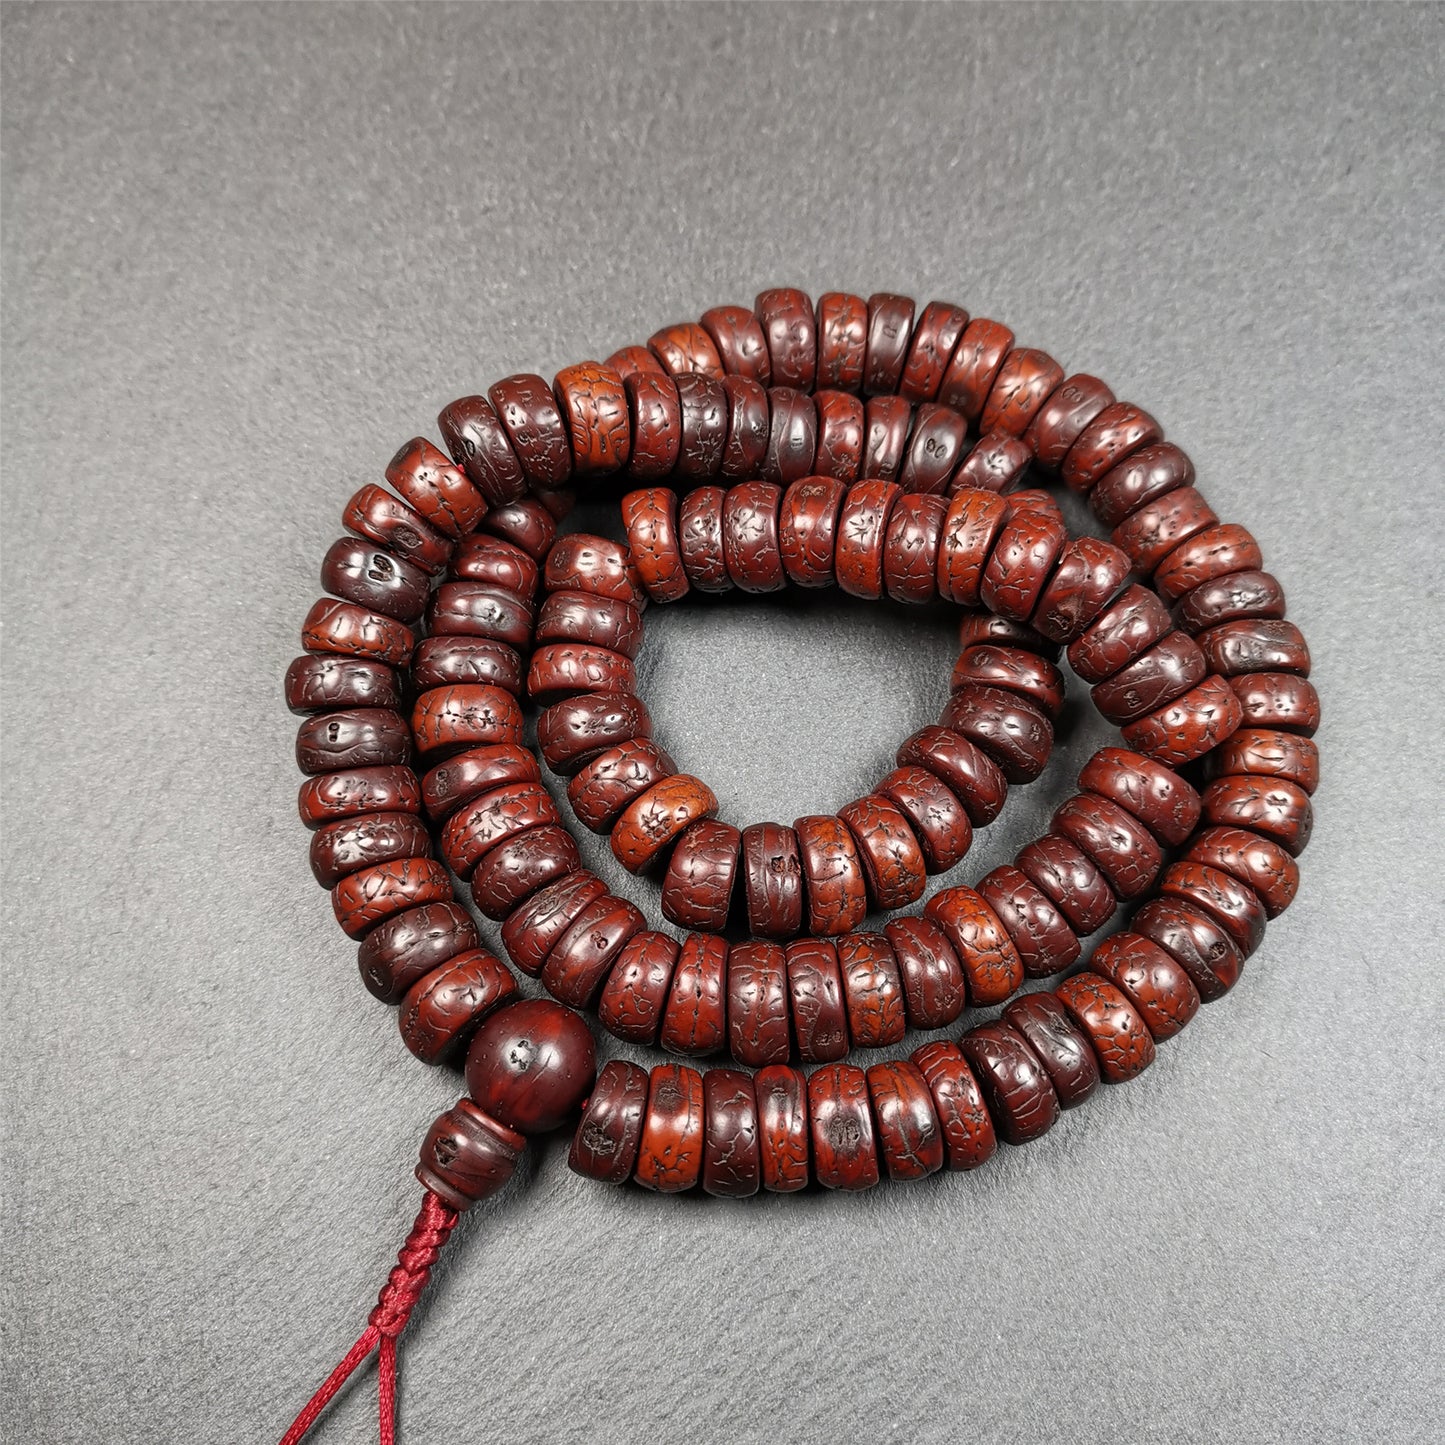 This bodhi seed mala was collected from Derge county,about 30 years old,hold and blessed by a lama. It is composed of 108 bodhi seed beads, bevel cut shape,brown color,approximately 13mm / 0.5 inch ,perimeter is about 70cm,27.5 inches.